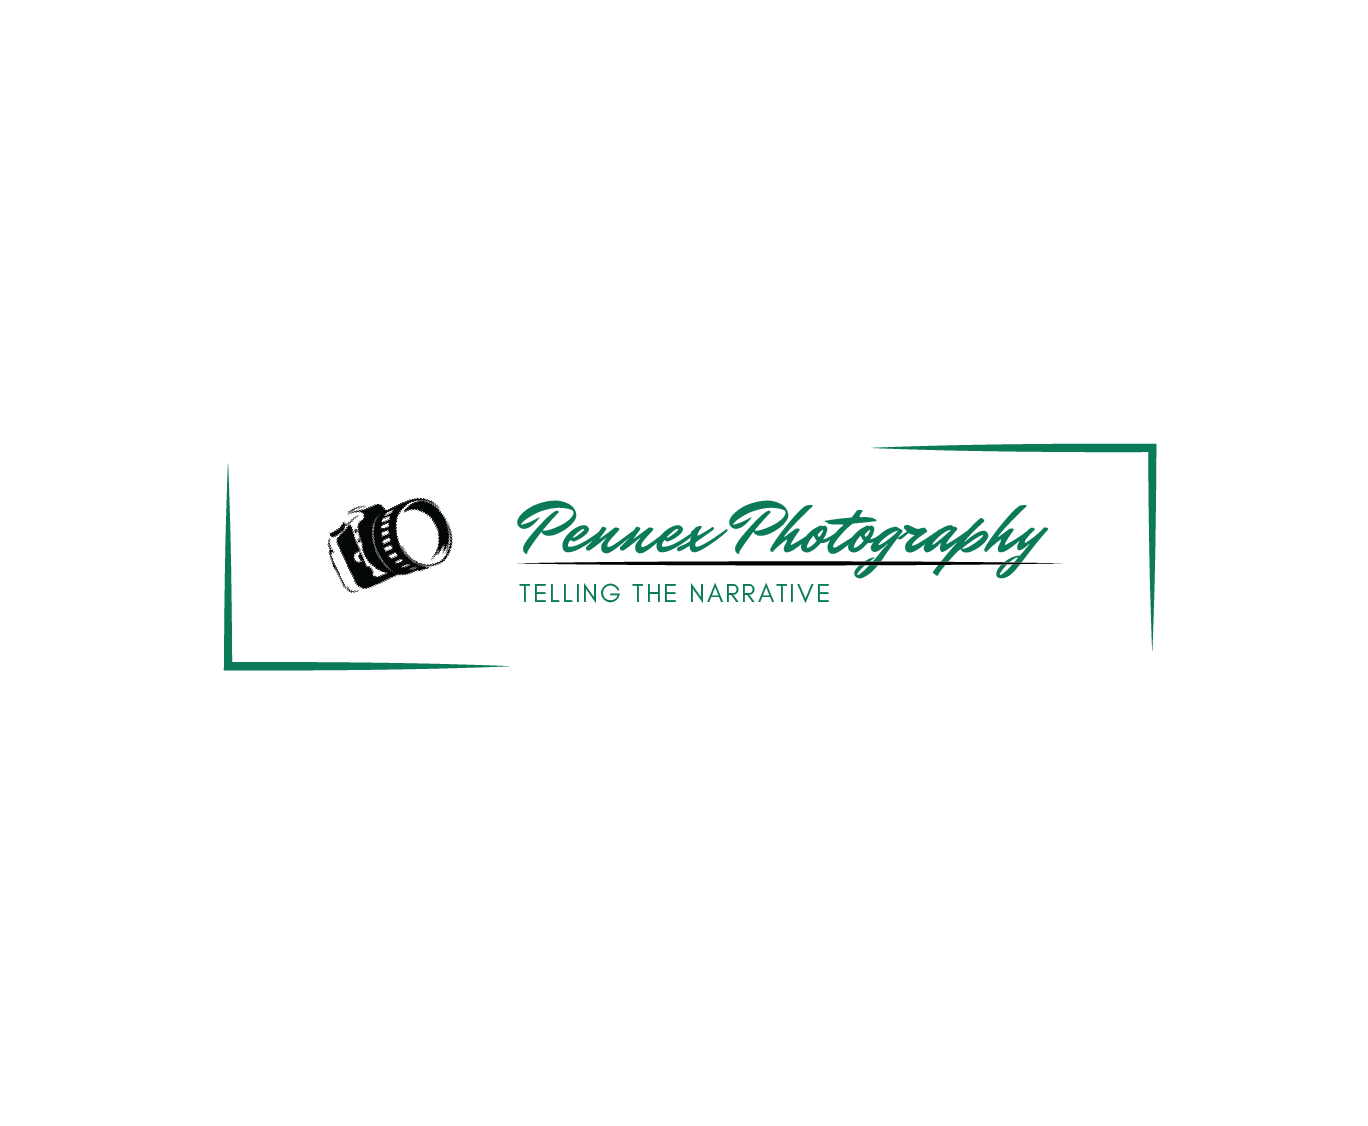 Pennex Photography